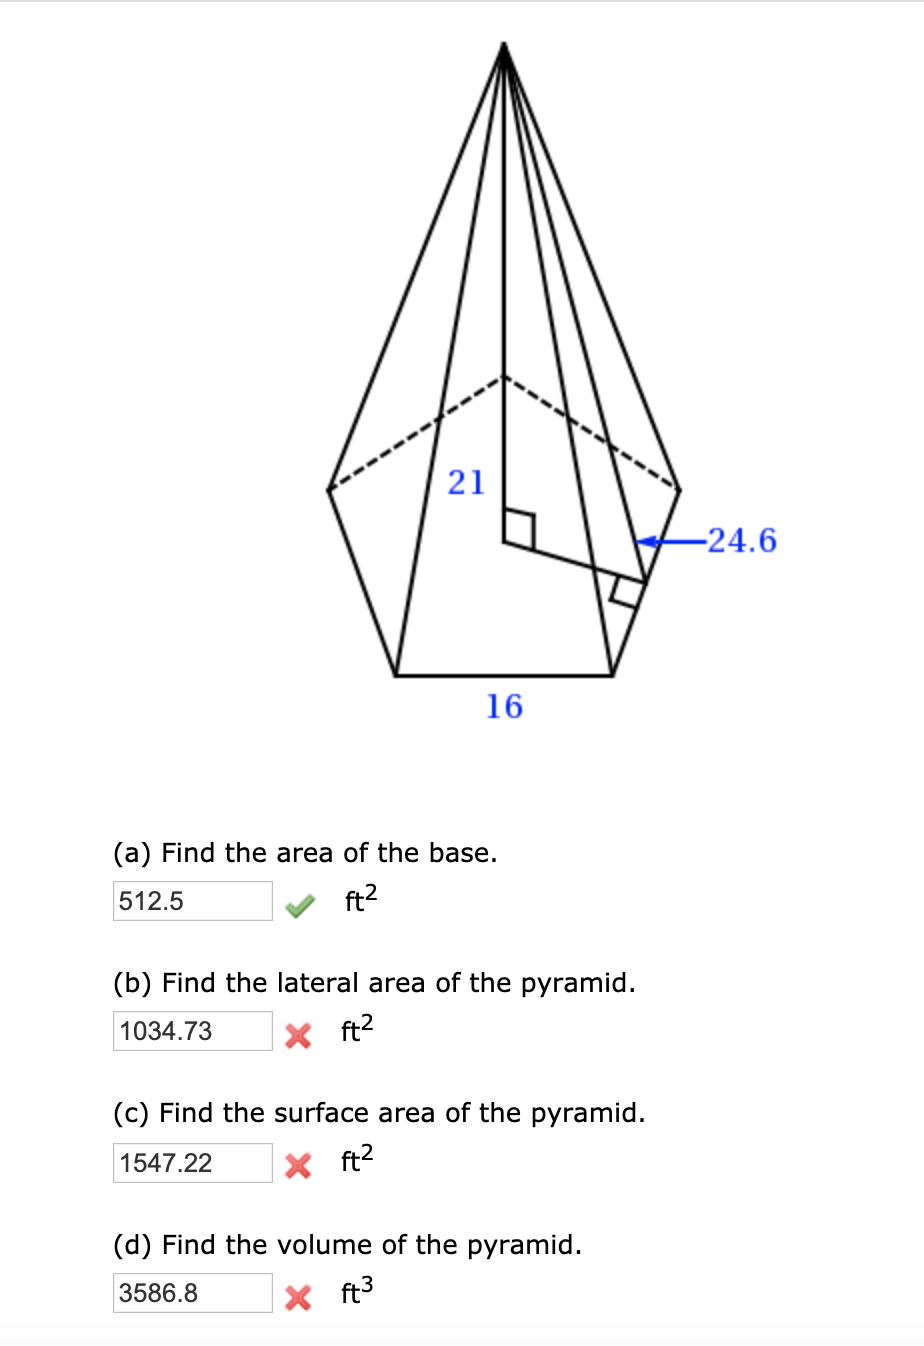 21
-24.6
16
(a) Find the area of the base.
512.5
ft2
(b) Find the lateral area of the pyramid.
1034.73
X ft2
(c) Find the surface area of the pyramid.
1547.22
X ft?
(d) Find the volume of the pyramid.
3586.8
X ft3
